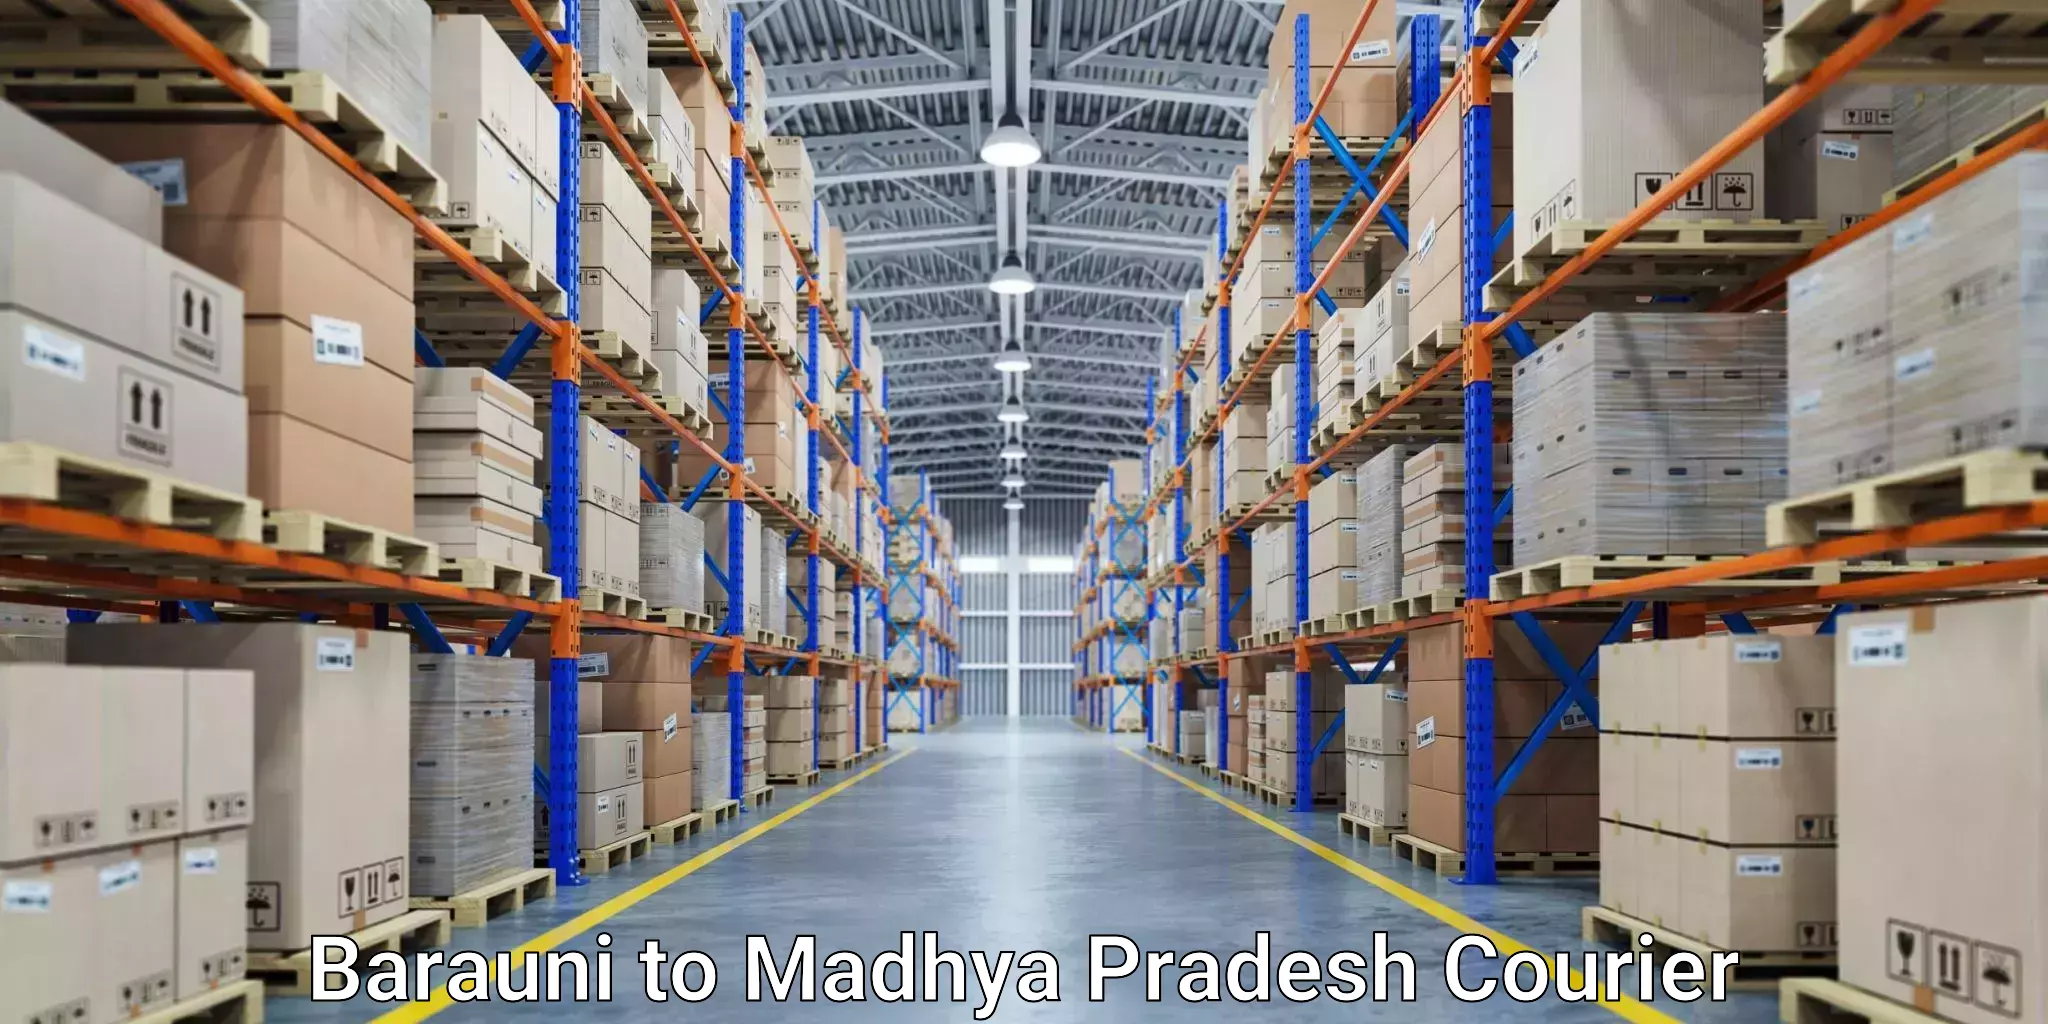 Package delivery network Barauni to Madhya Pradesh